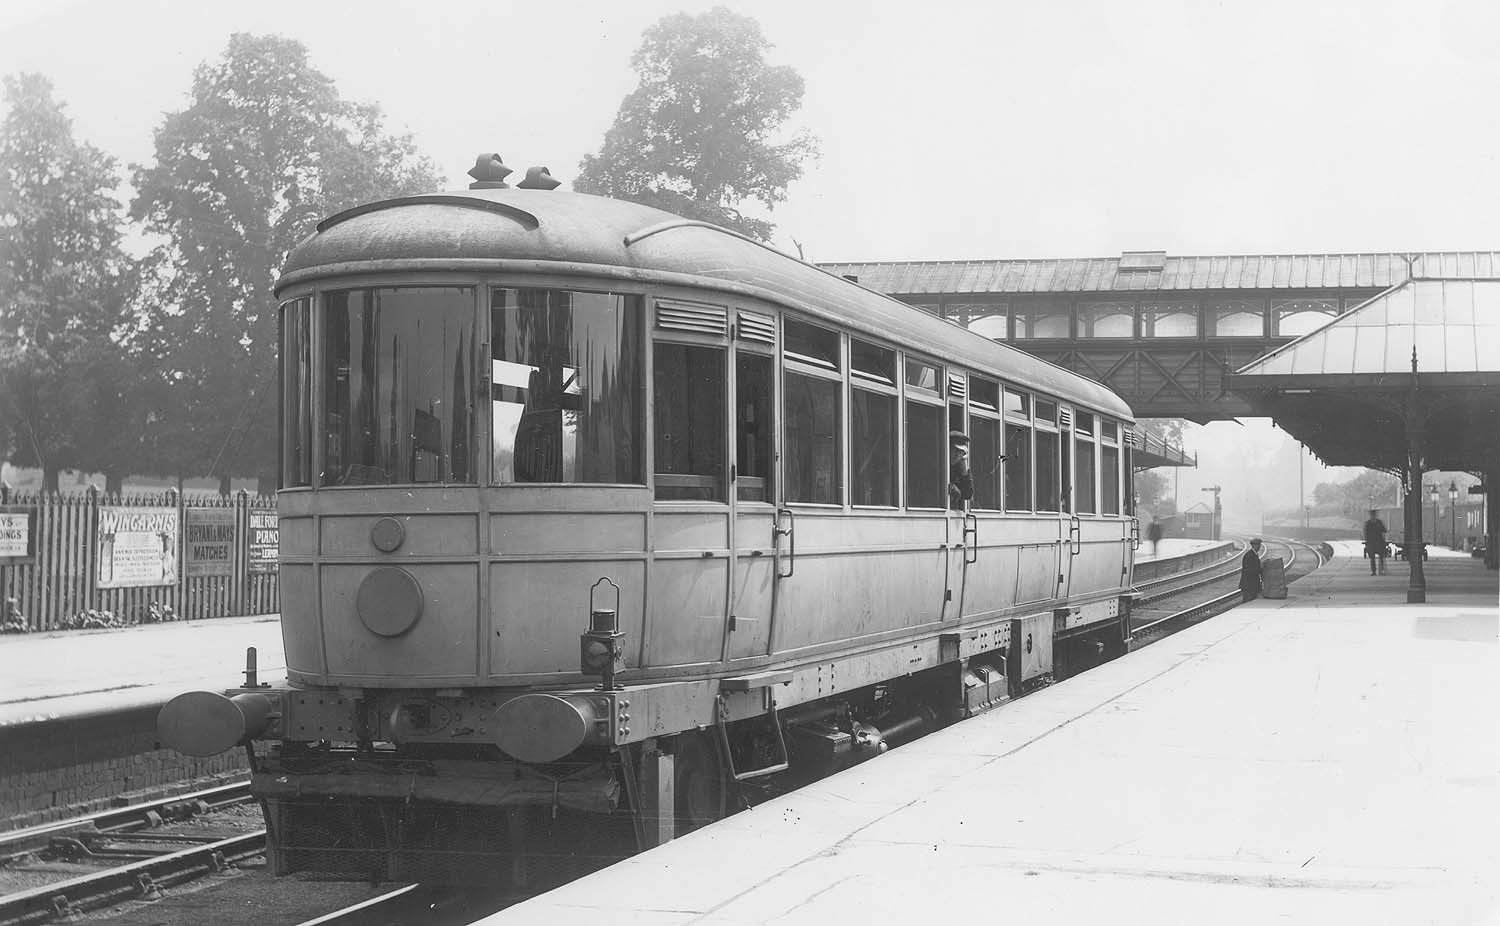 The Daimler experimental railcar posed for the camera at Kenilworth station shortly before the outbreak of the First World War